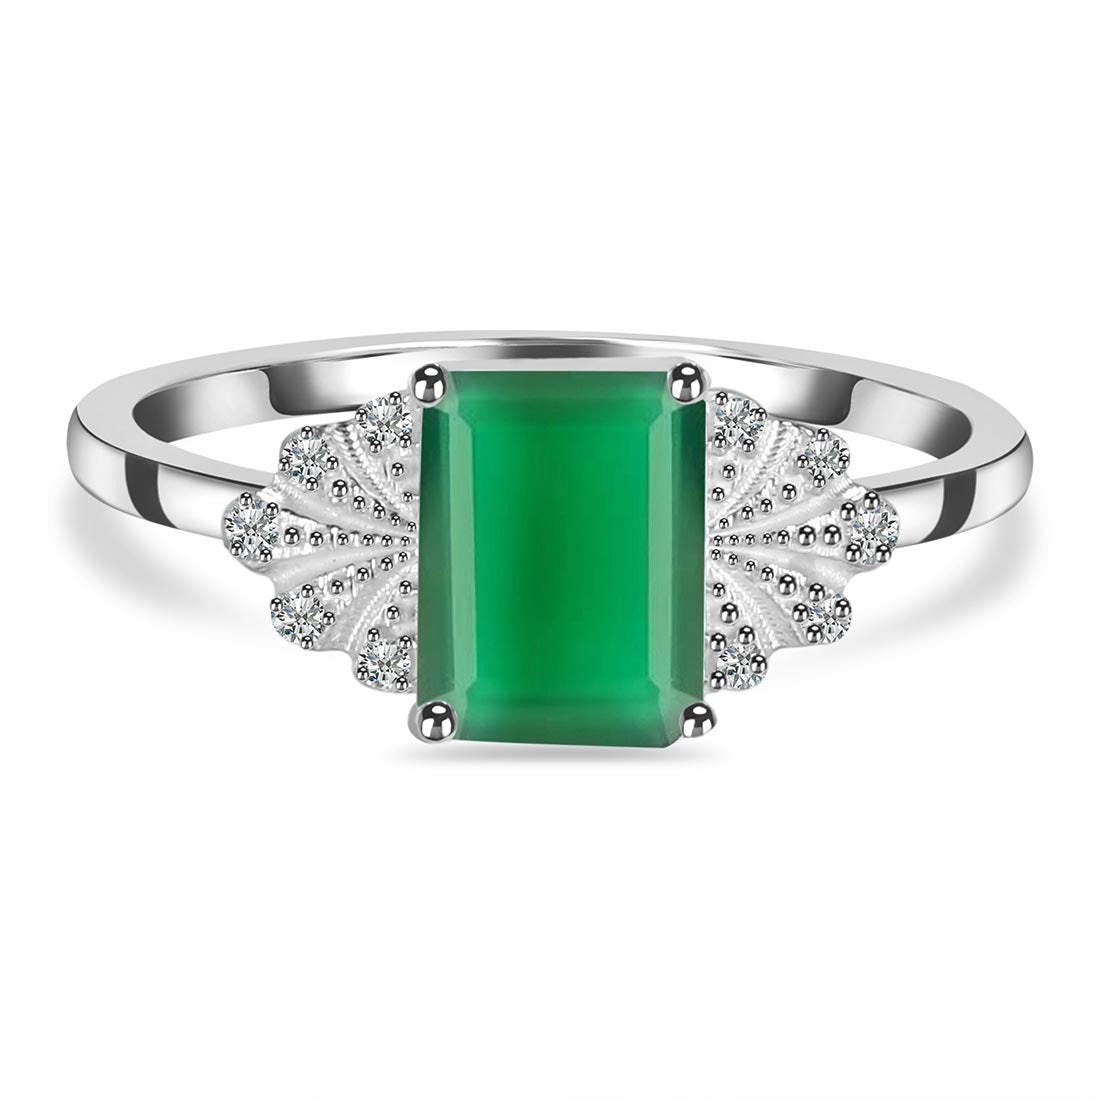 Green Onyx Ring in Silver, Art deco ring, green onyx, Rings, green onyx meaning green onyx stone benefits